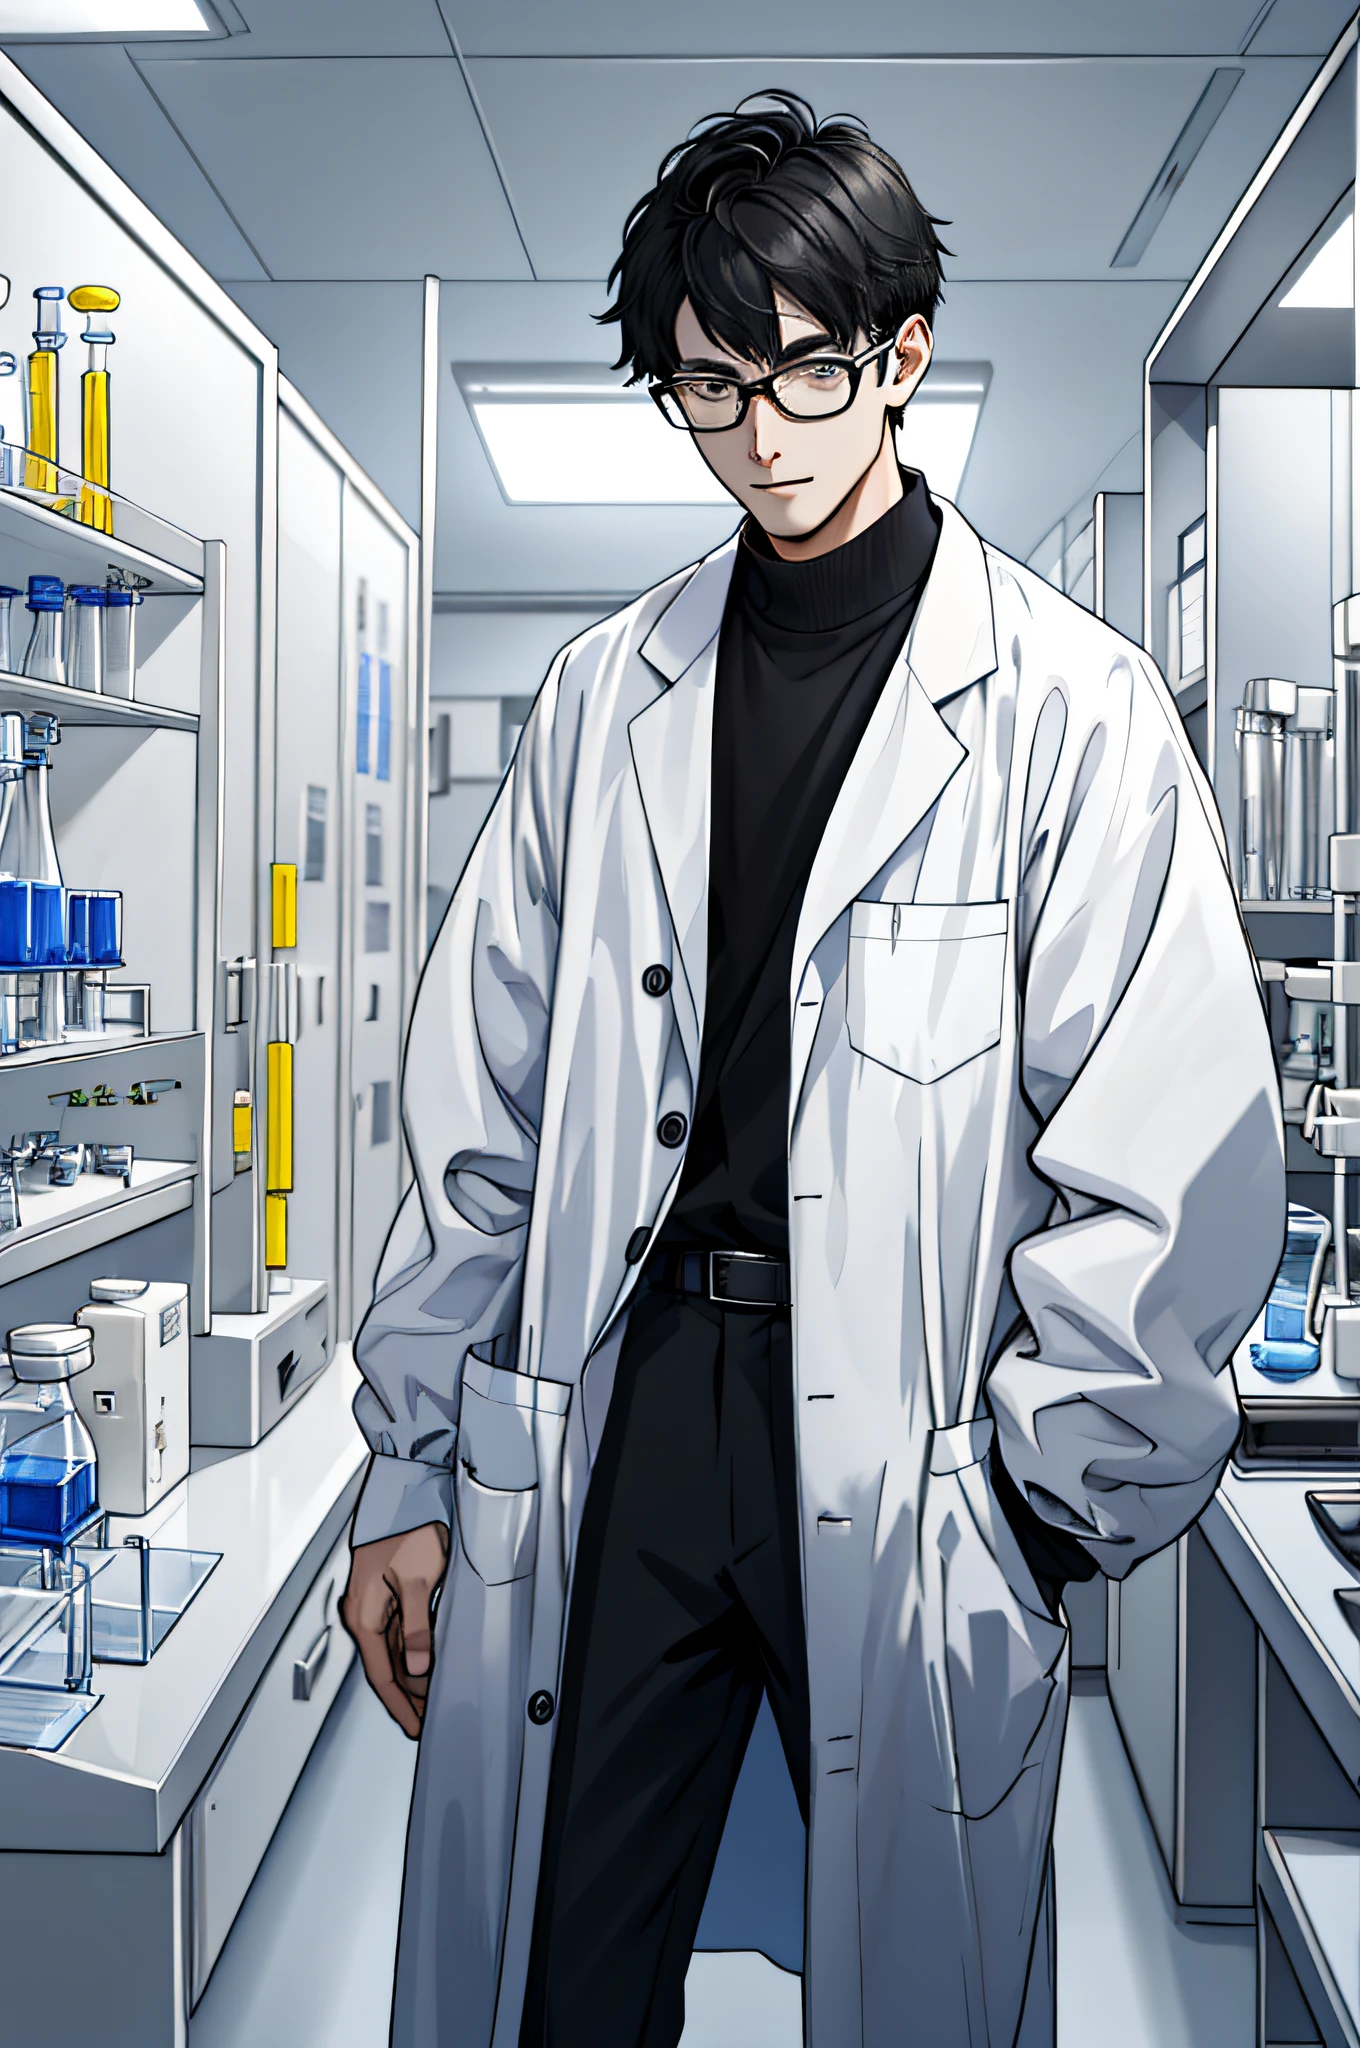 "Draw a tall young physicist，Wear a lab coat，stood in a lab，Focus on scientific experiments with experimental bottles。"